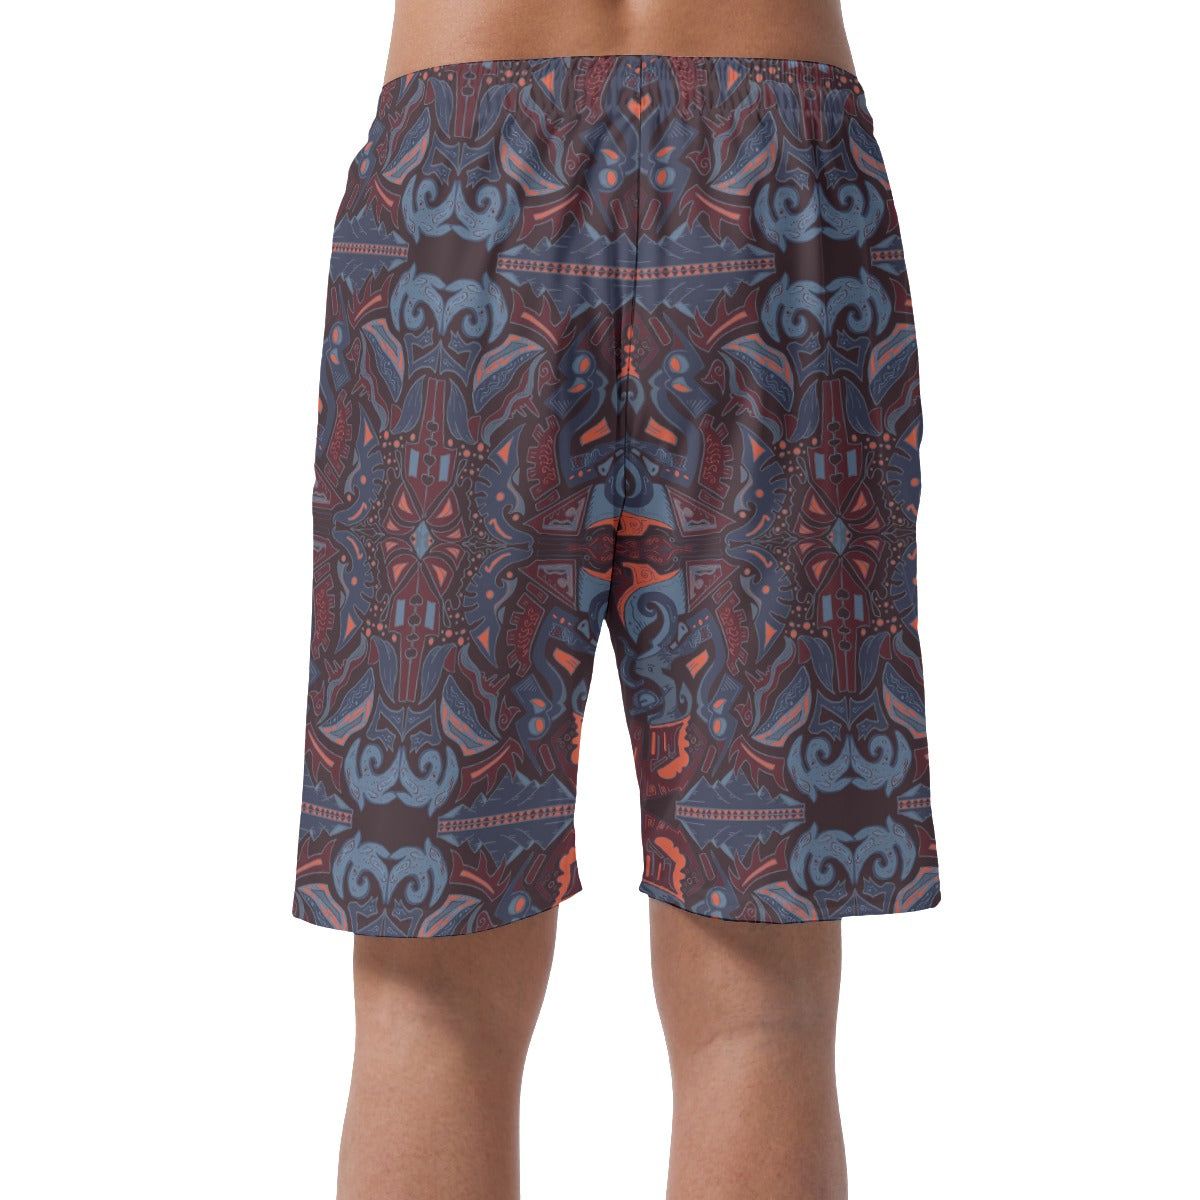 All-Over Print Men's Casual Shors